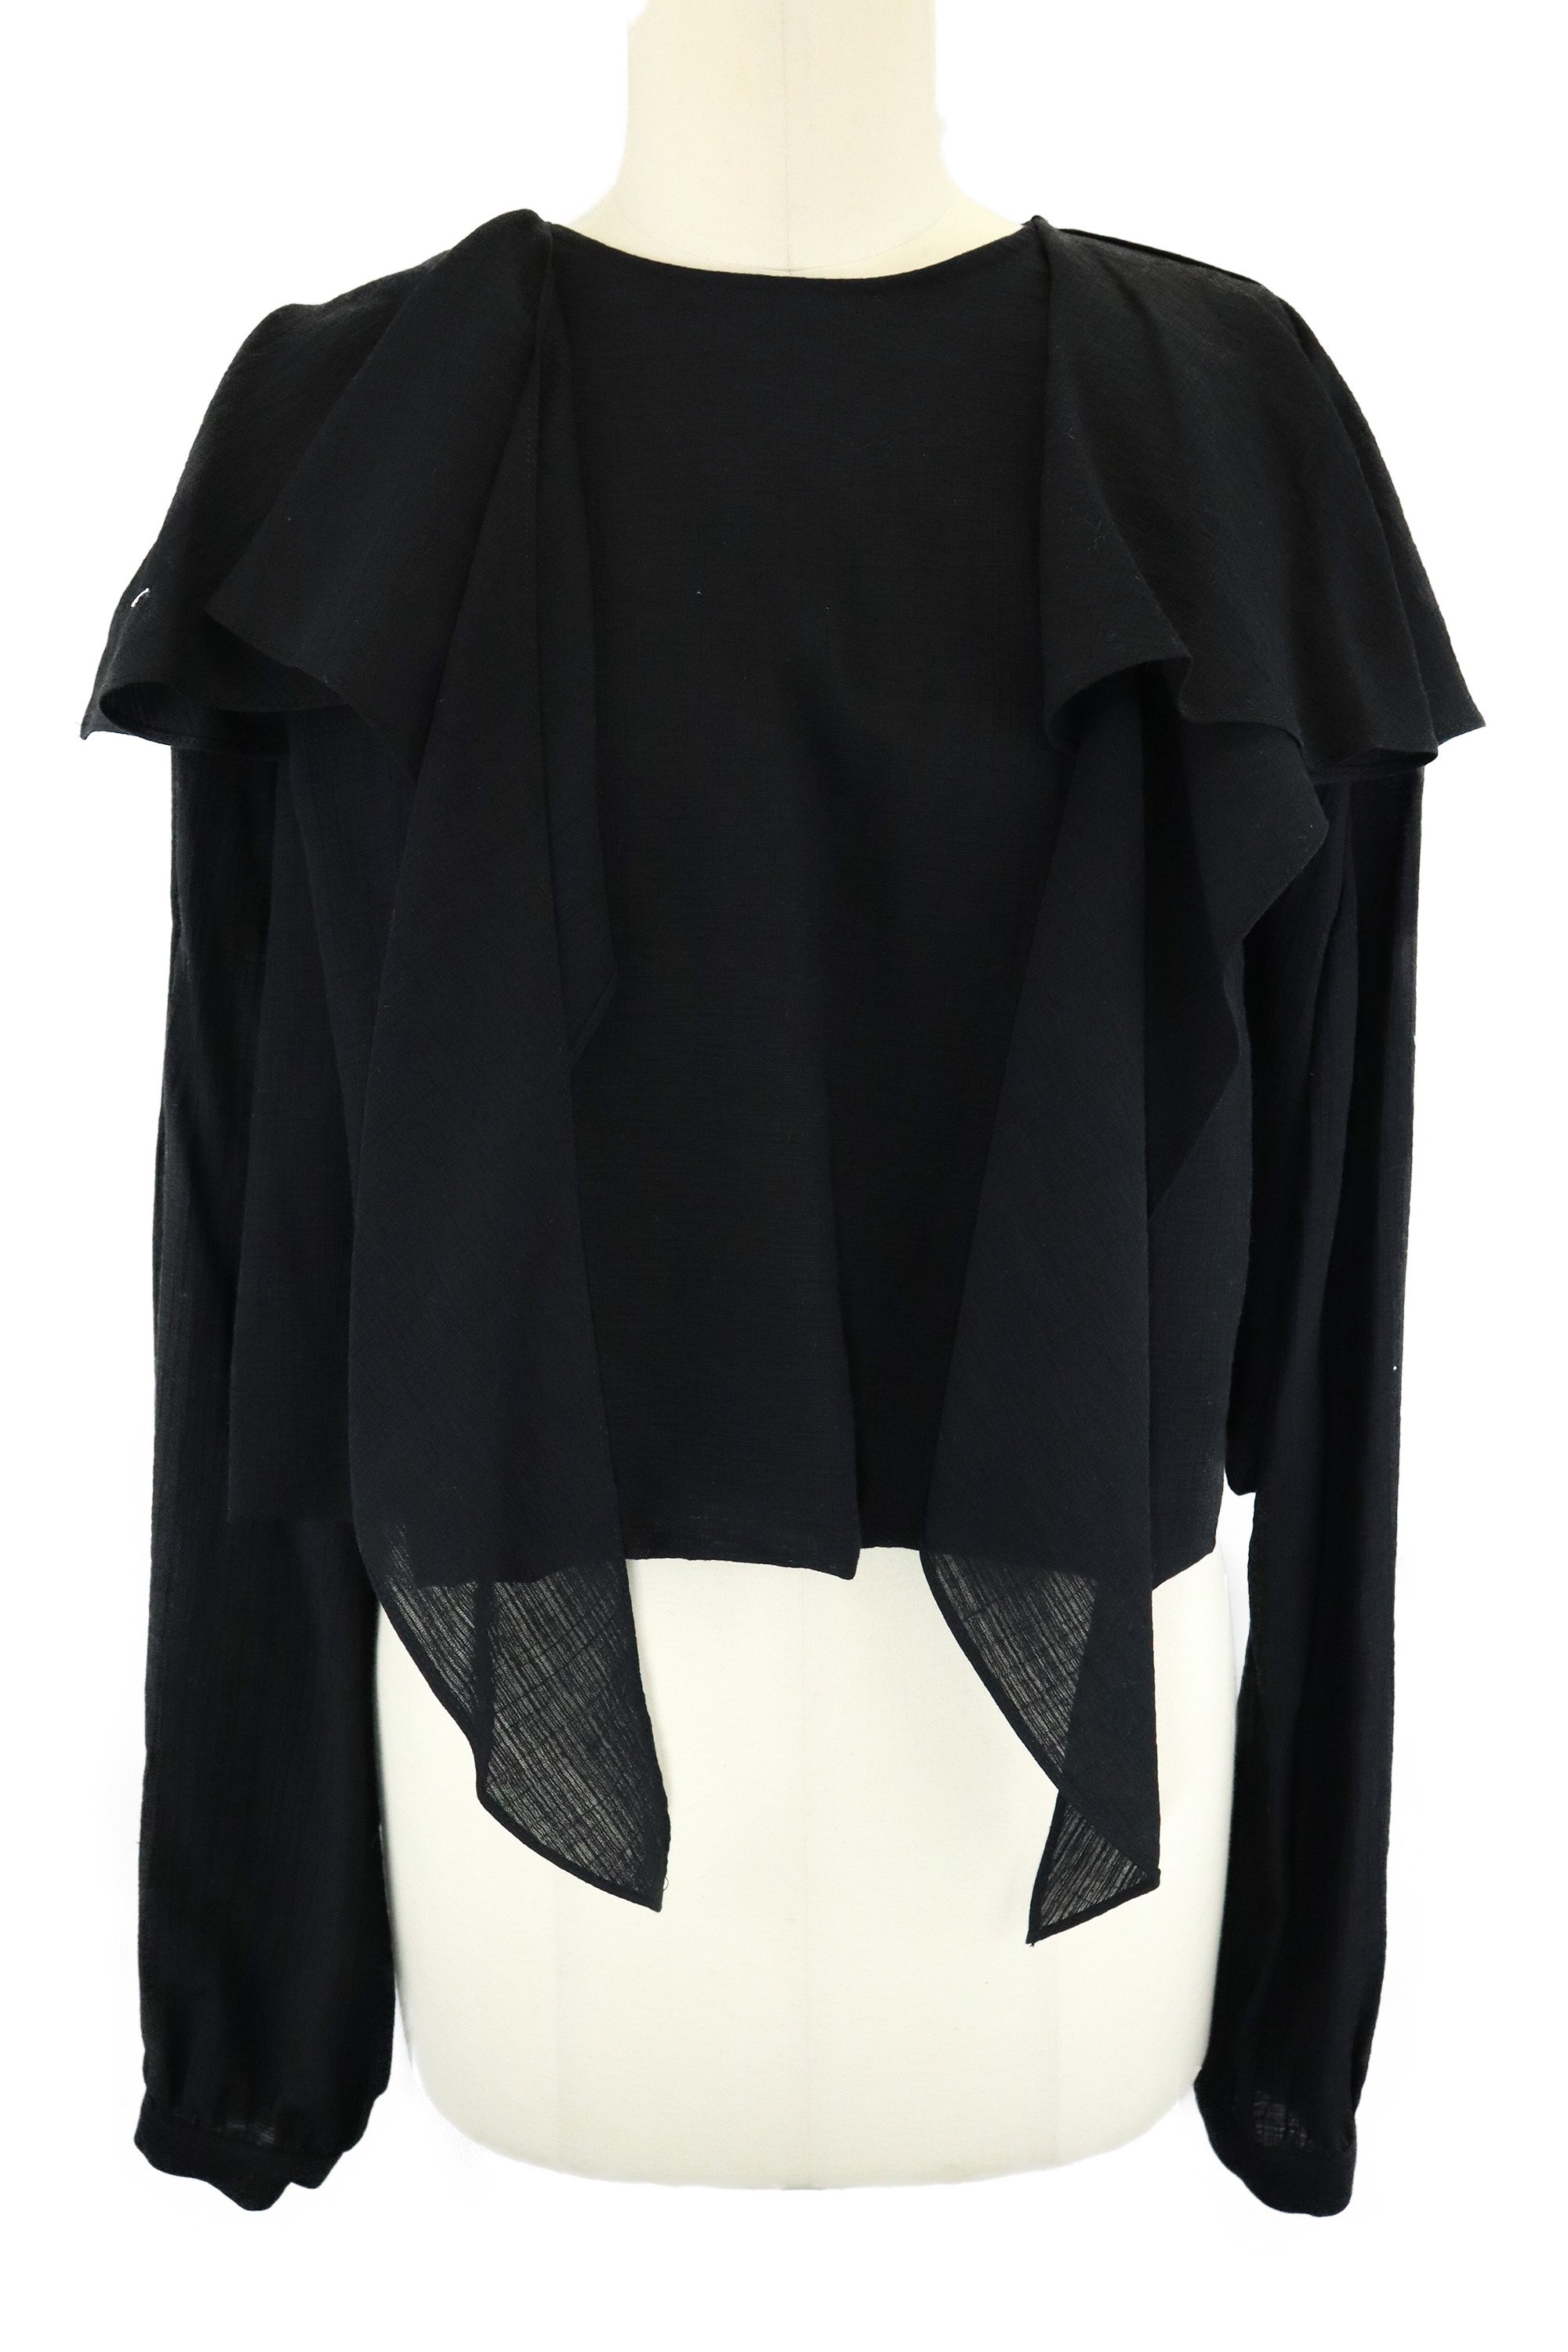 <img class='new_mark_img1' src='https://img.shop-pro.jp/img/new/icons6.gif' style='border:none;display:inline;margin:0px;padding:0px;width:auto;' />RECTO Shorder scarf layer crop blouse (BLACK)